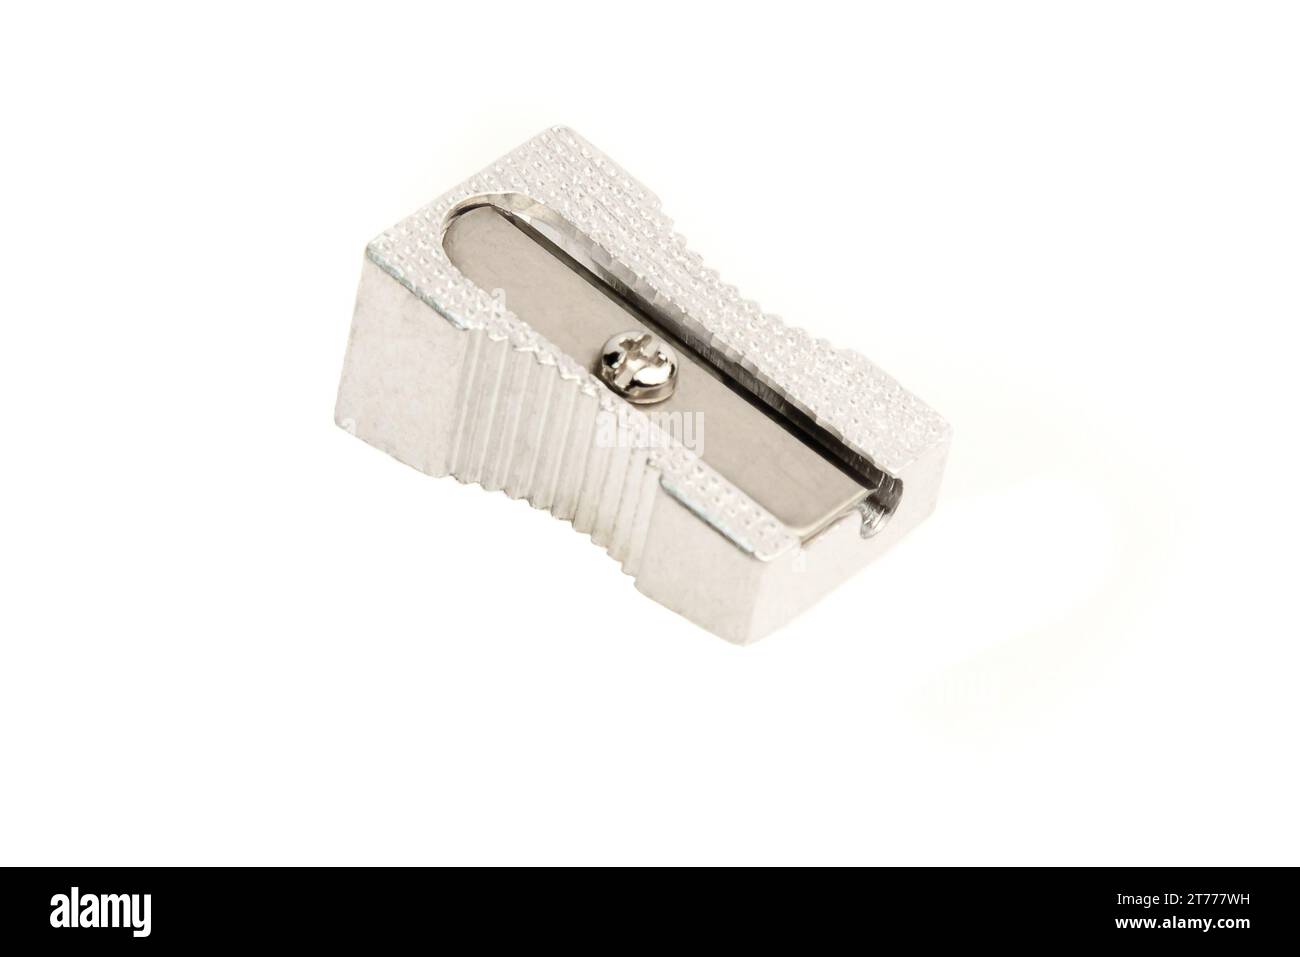 close up of a sharpener on white background Stock Photo